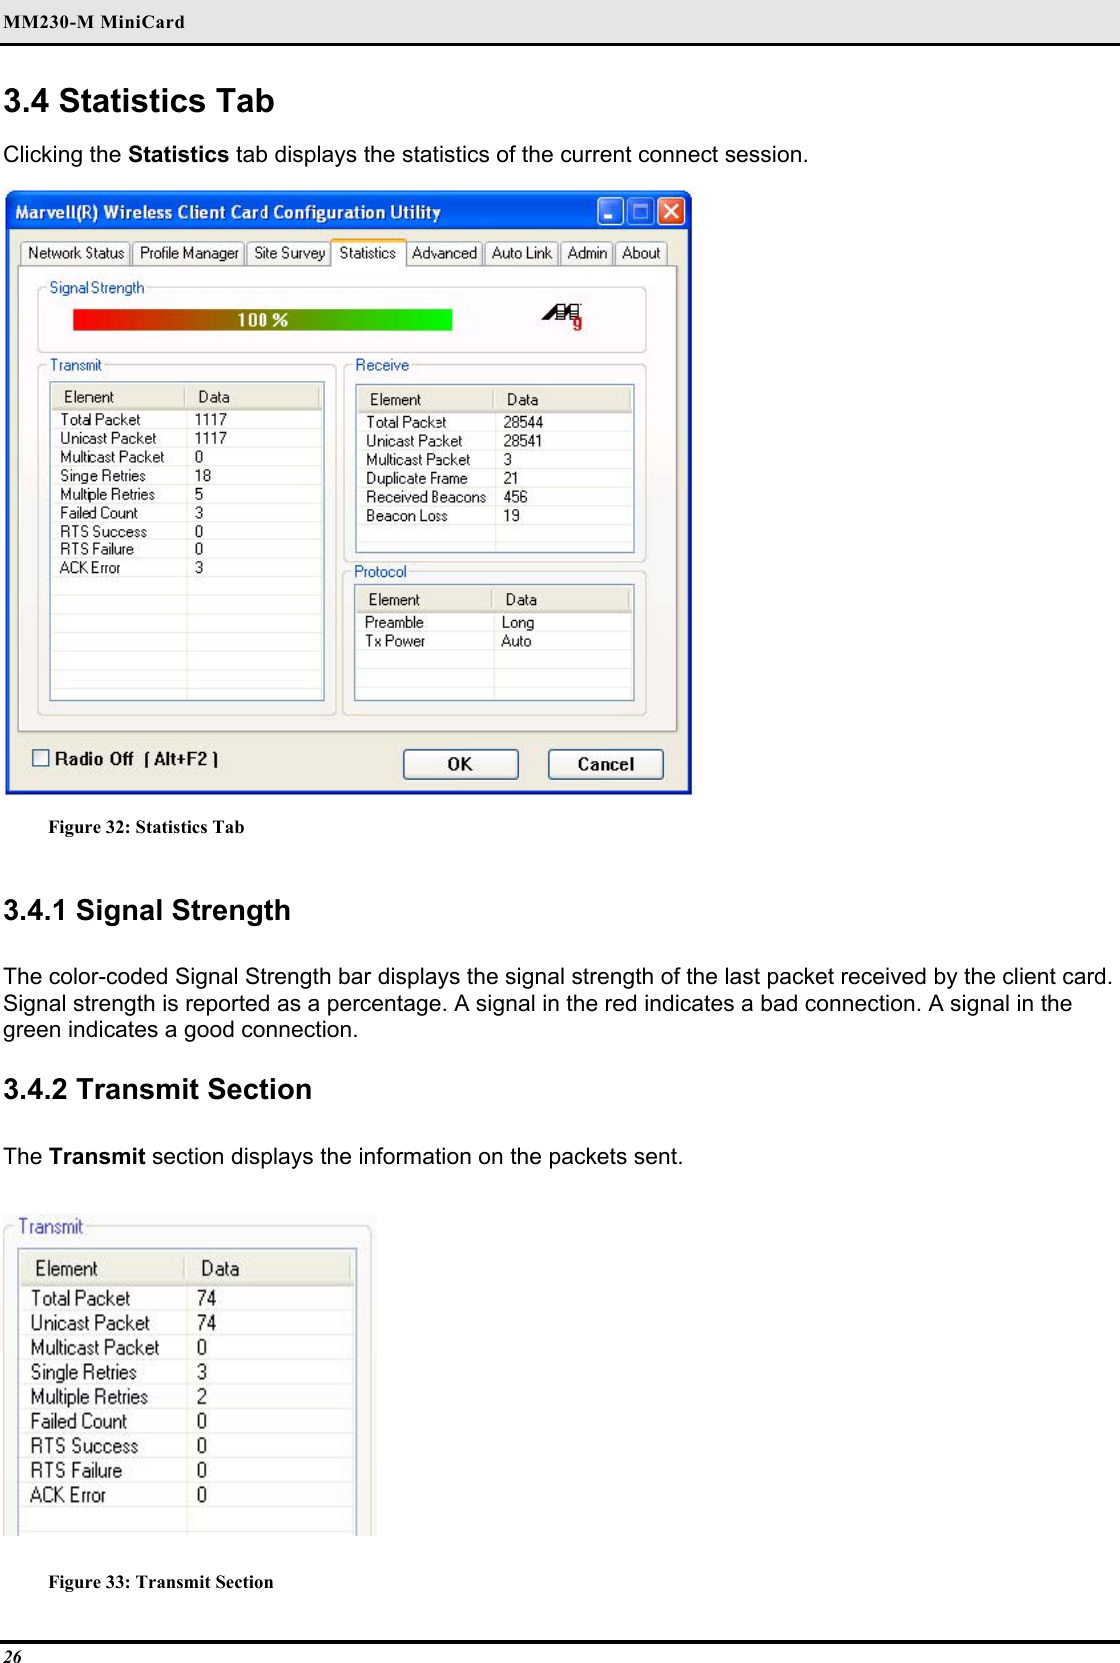 MM230-M MiniCard 26 3.4 Statistics Tab  Clicking the Statistics tab displays the statistics of the current connect session.   Figure 32: Statistics Tab  3.4.1 Signal Strength   The color-coded Signal Strength bar displays the signal strength of the last packet received by the client card. Signal strength is reported as a percentage. A signal in the red indicates a bad connection. A signal in the green indicates a good connection.   3.4.2 Transmit Section  The Transmit section displays the information on the packets sent.   Figure 33: Transmit Section 